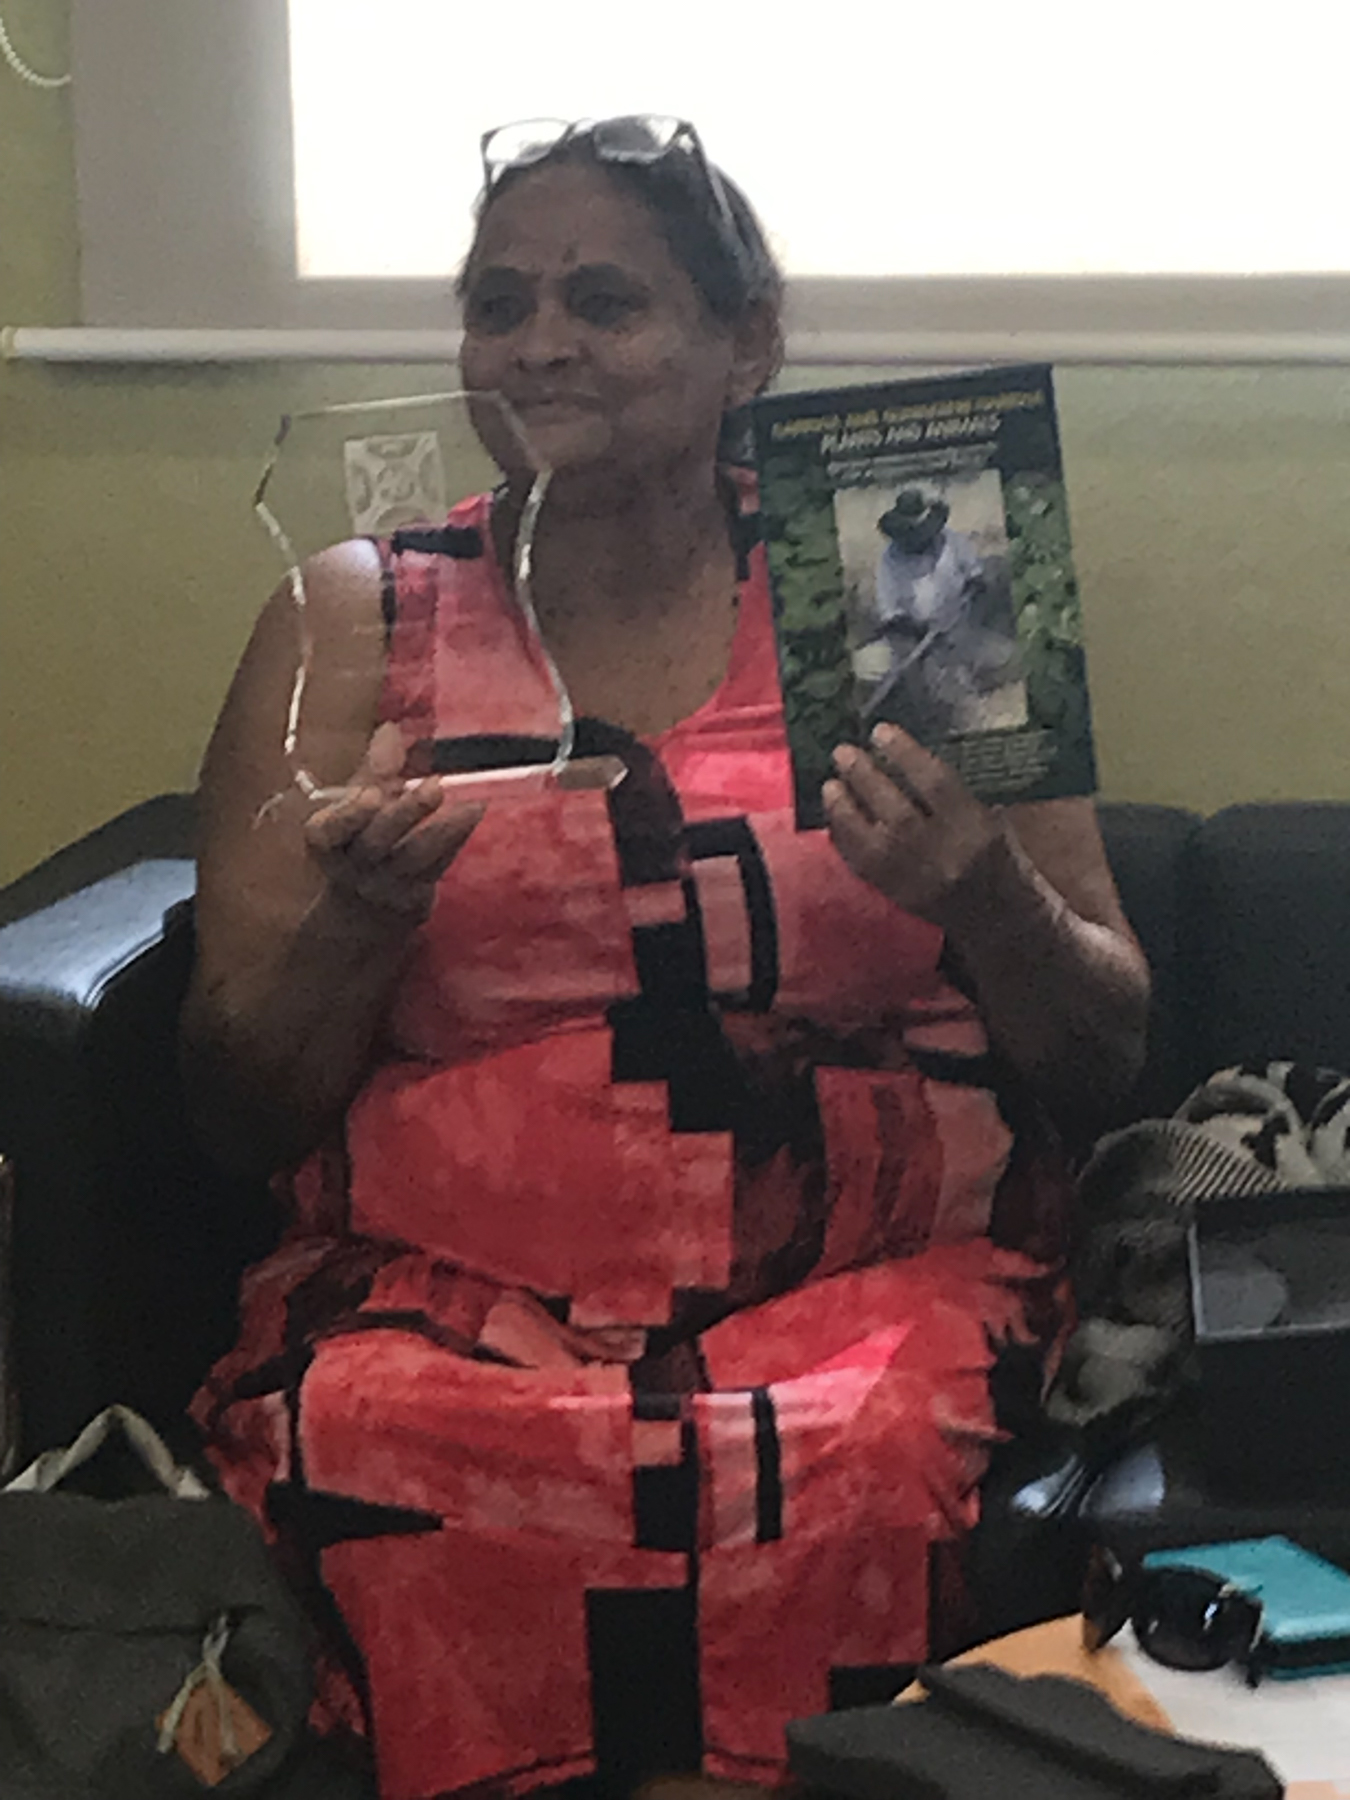 Daphne Mawson sitting down on a char, holding the Mrs Nakkamarra Nixon Award on her right hand, and the Garrwa Book on her left hand.